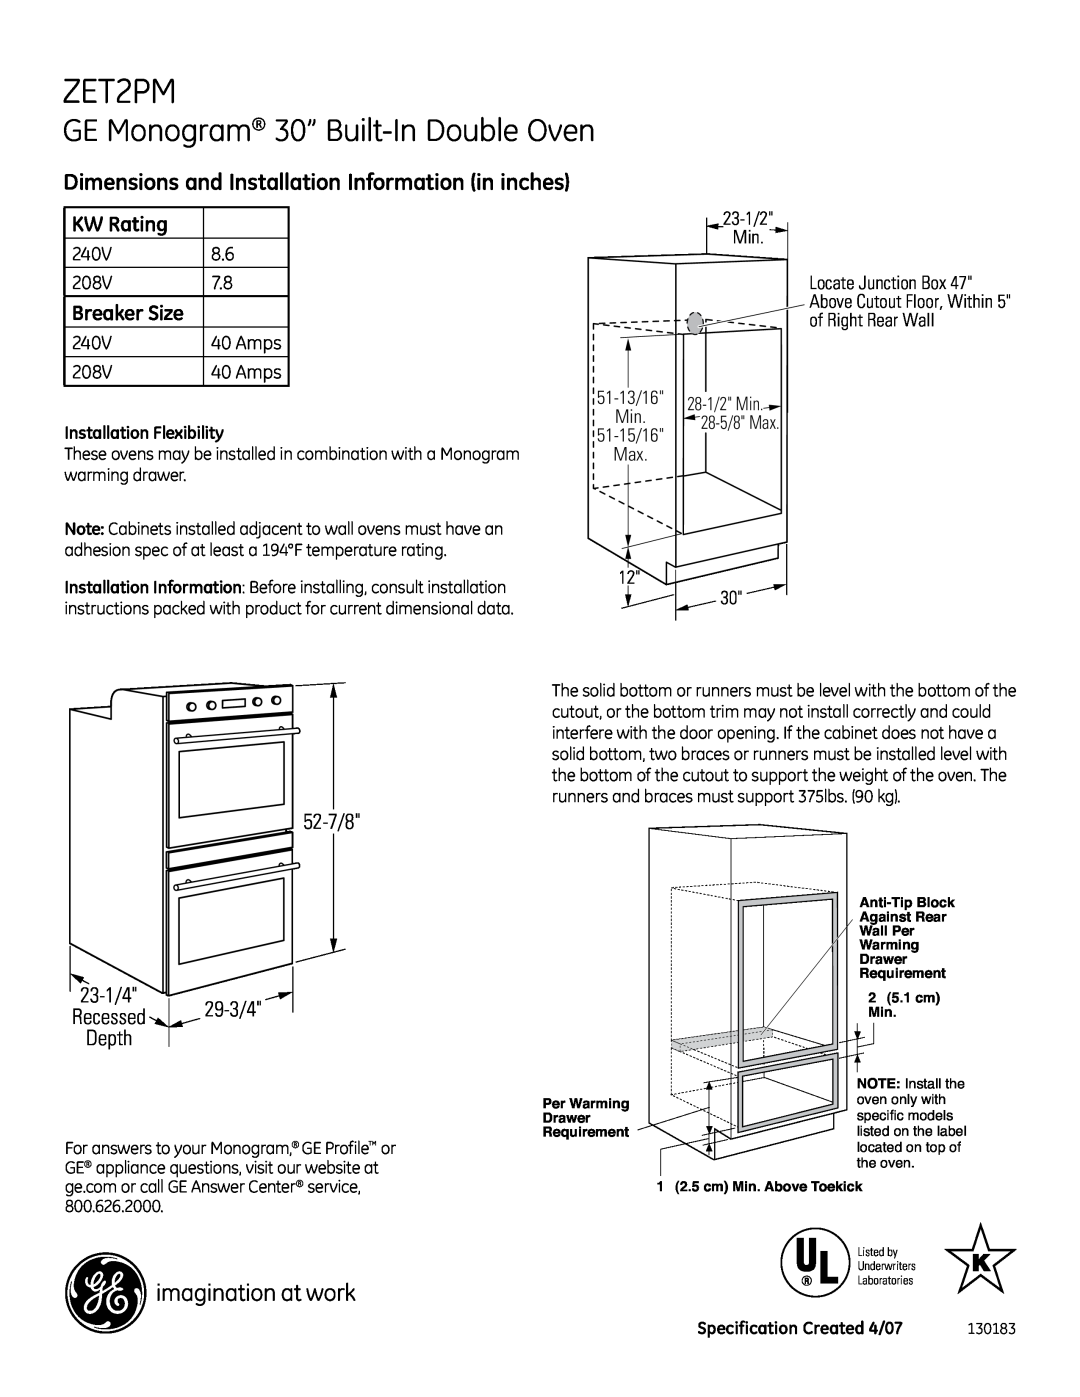 GE Monogram ZET2PM dimensions GE Monogram 30” Built-InDouble Oven, Dimensions and Installation Information in inches, 240V 